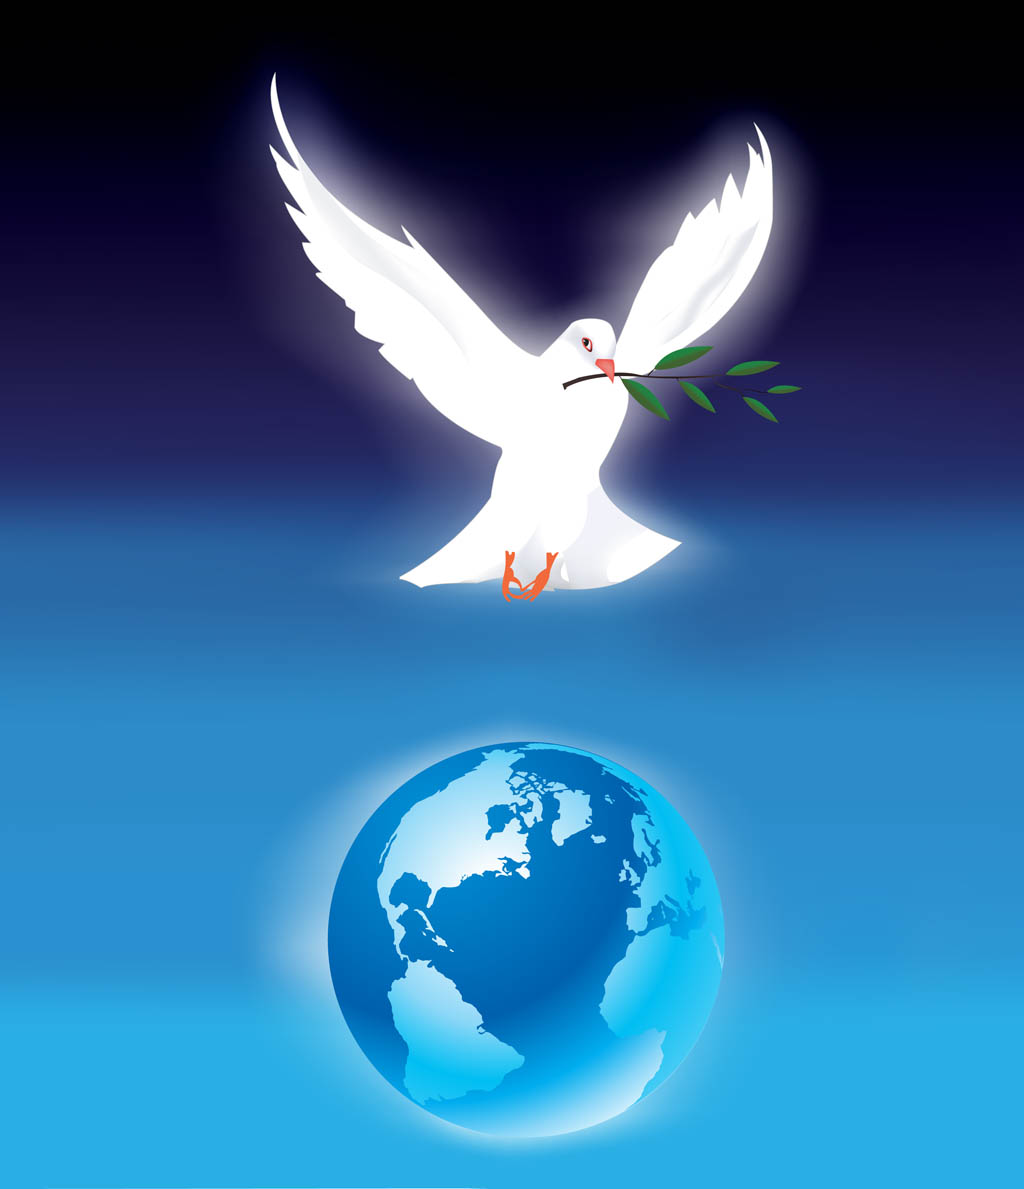 World Peace Poster Vector Art & Graphics | freevector.com